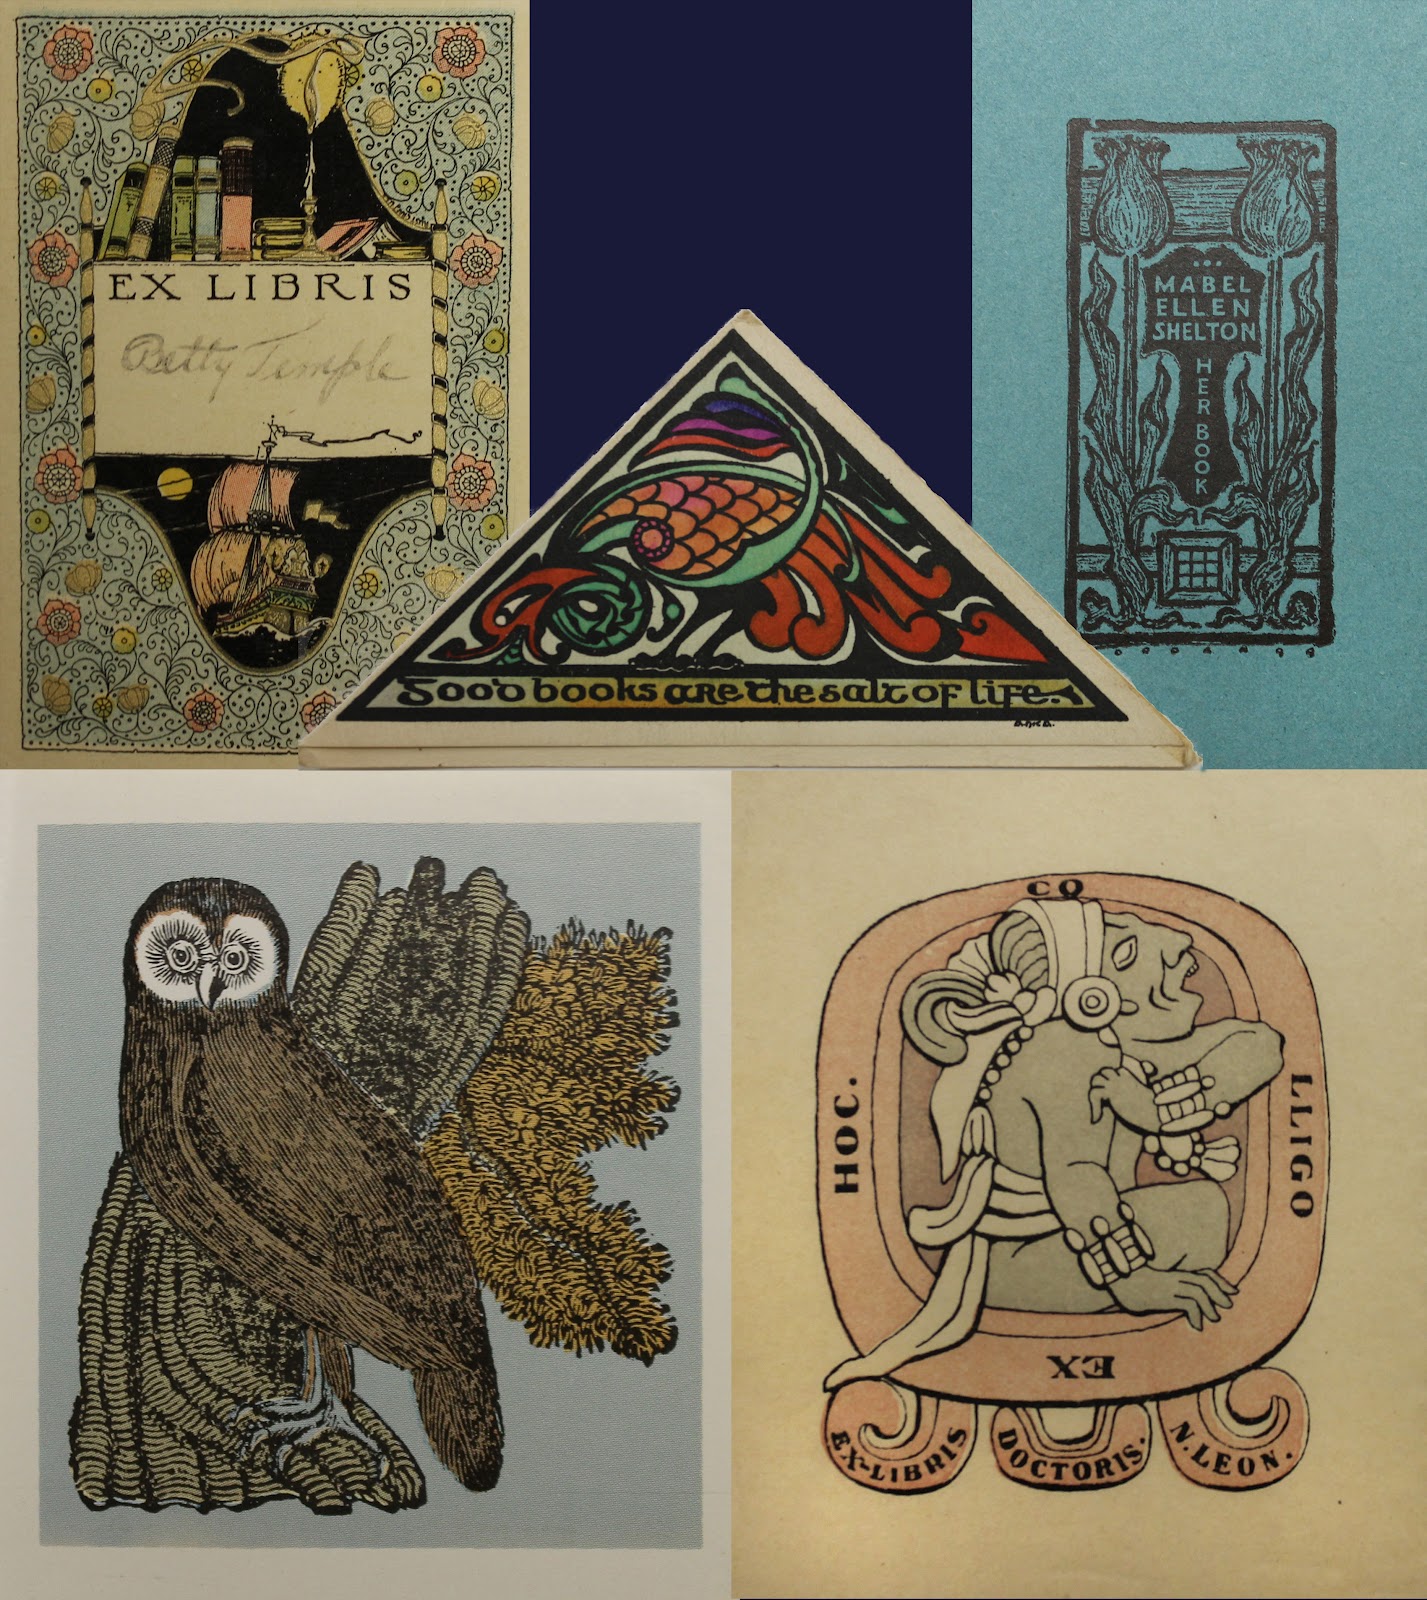 Multiple book plates with elaborate designs including an owl, an elaborate border, tulips, a pre-columbian figure and other decorative elements, 